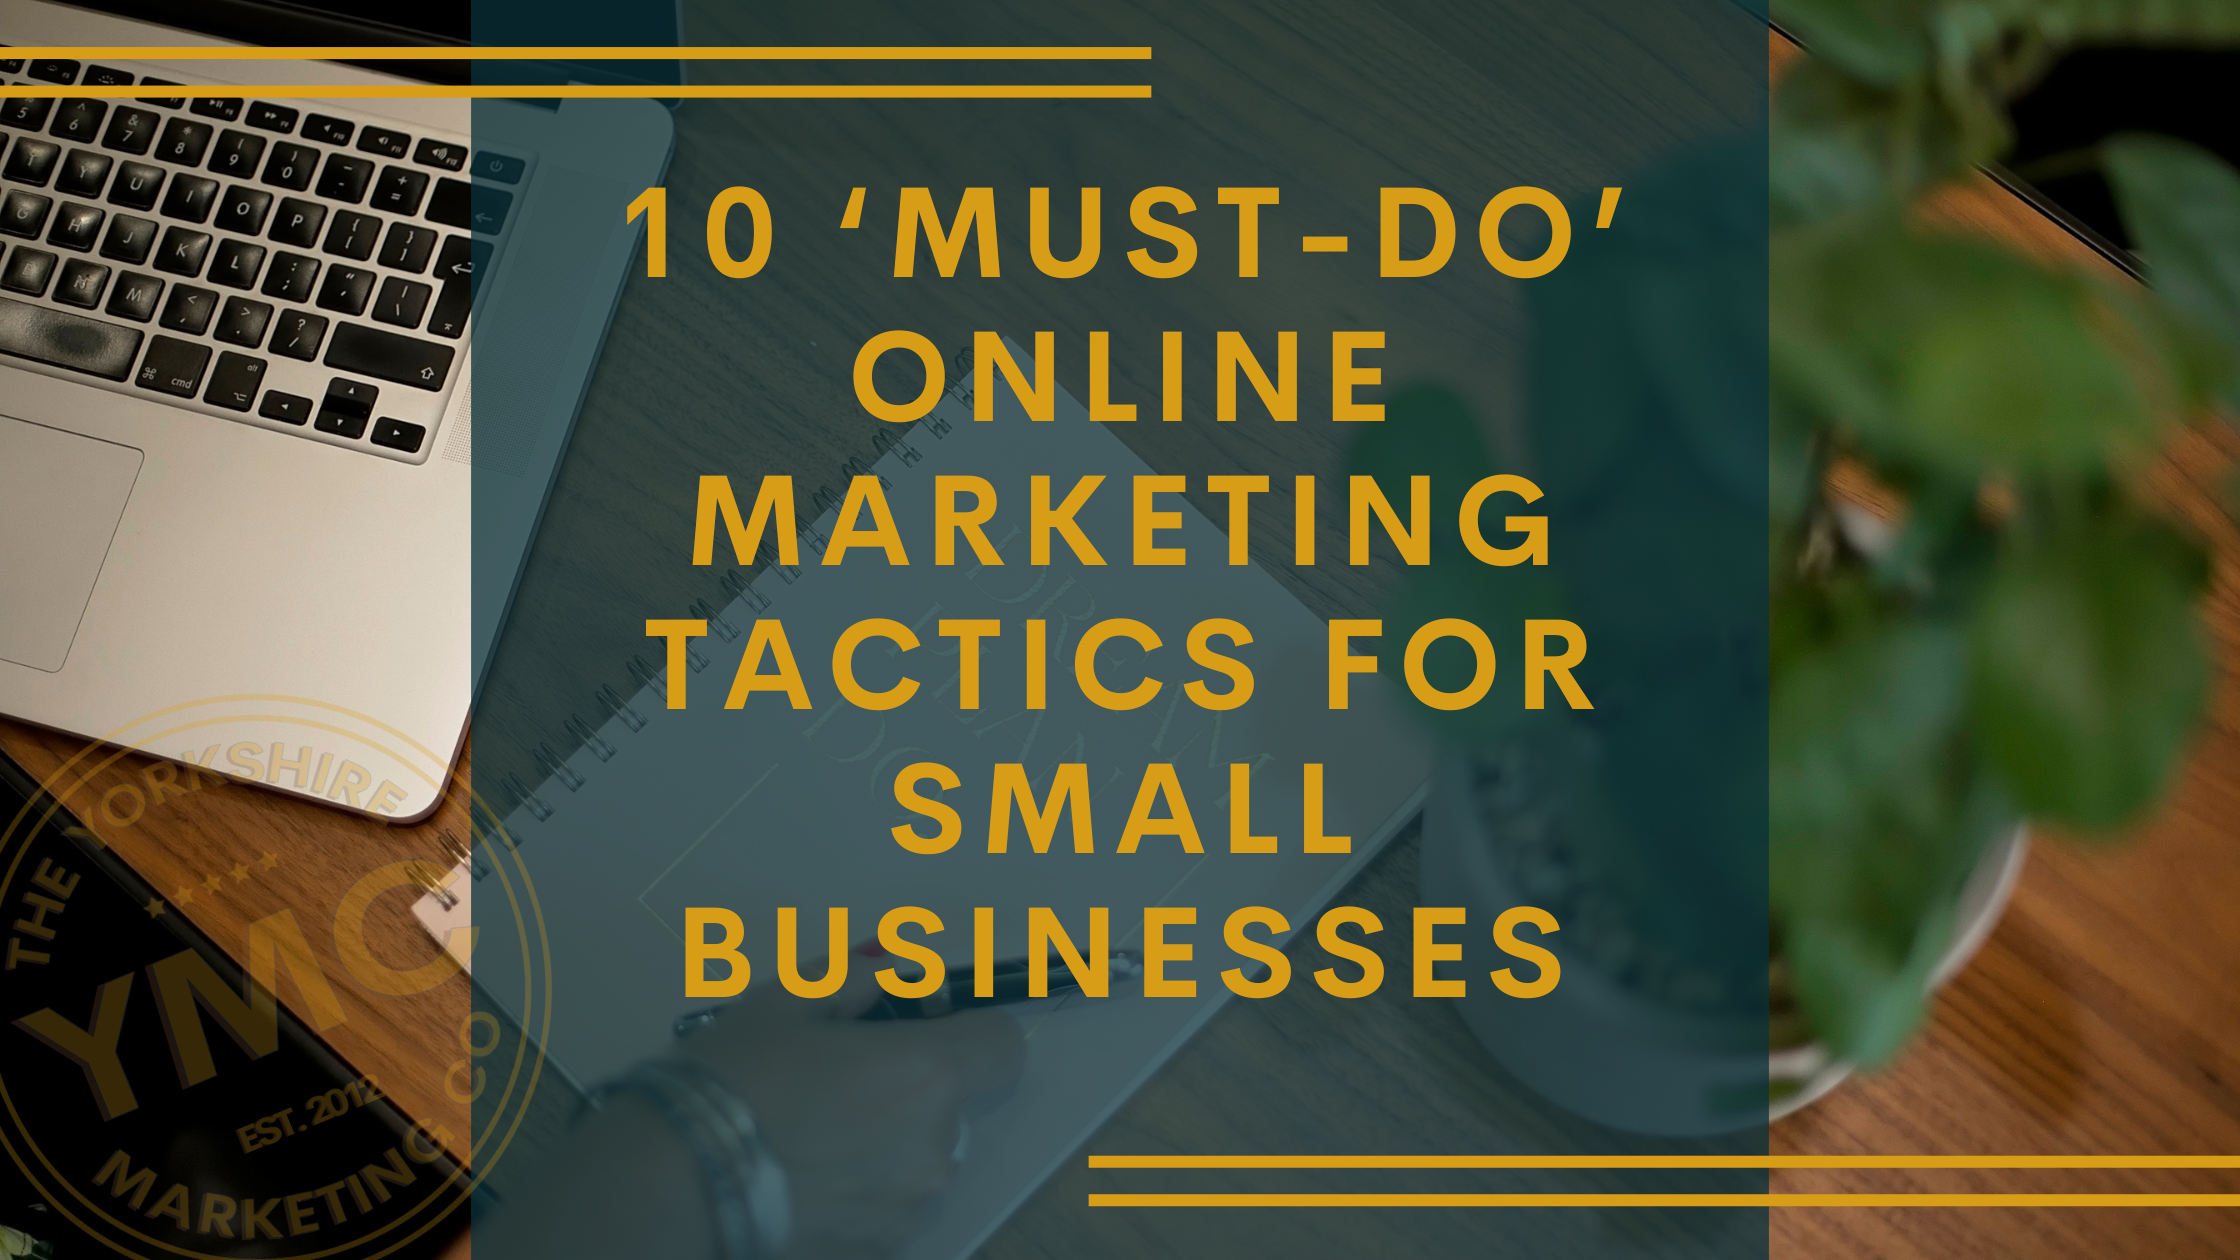 BLOG-10-must-do-online-marketing-tactics-for-small-businesses